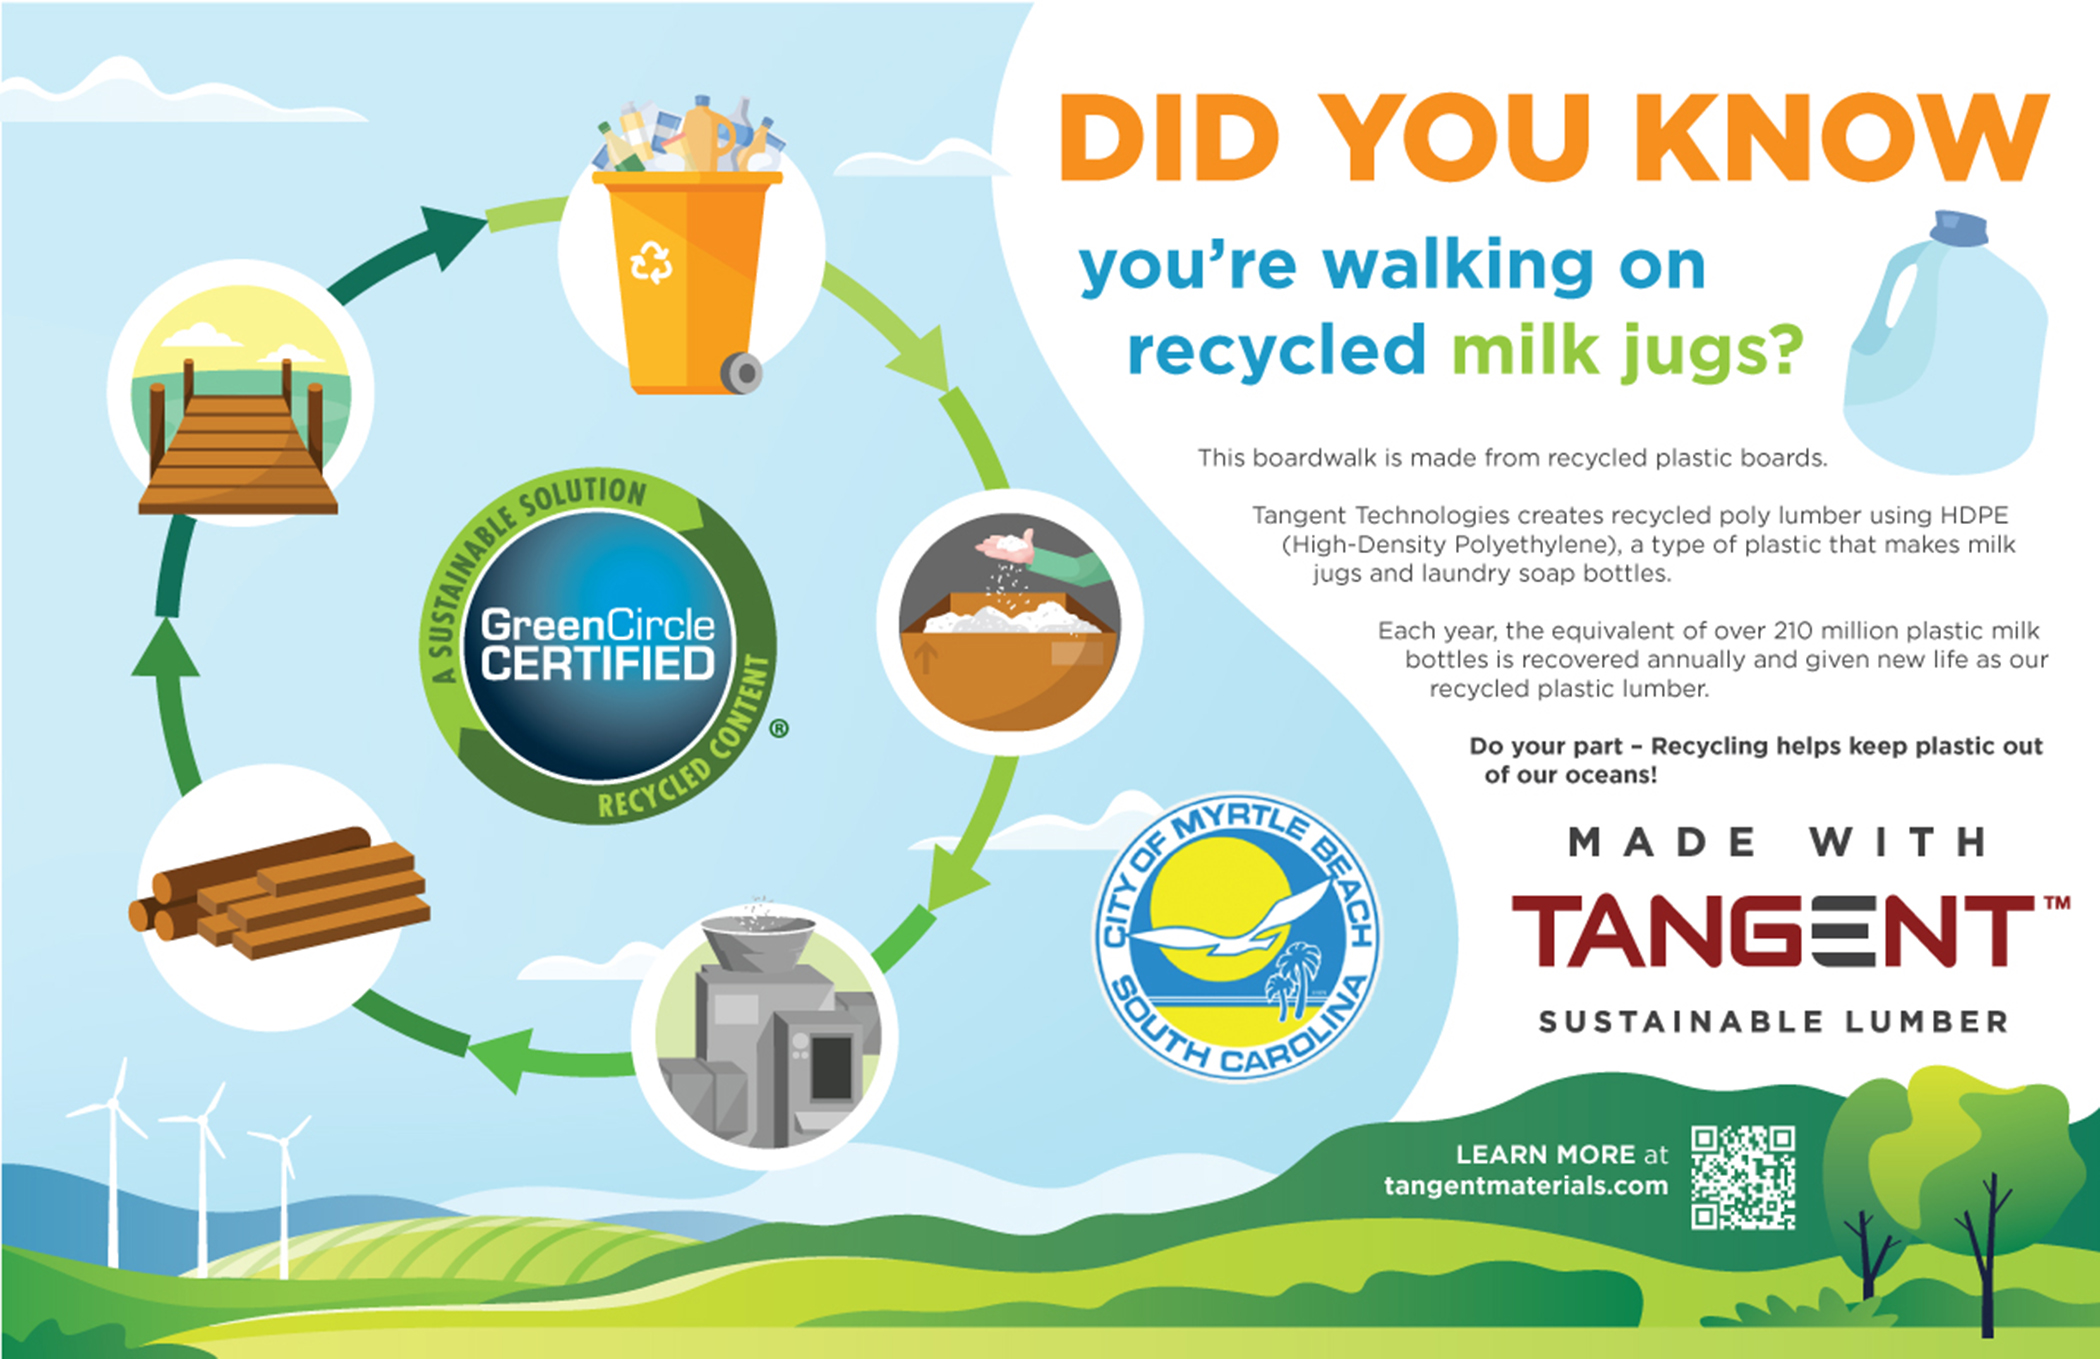 Tangent-COMMERCIAL-2022-Myrtle-Beach-Boardwalk-Recycling-Infographic_v8